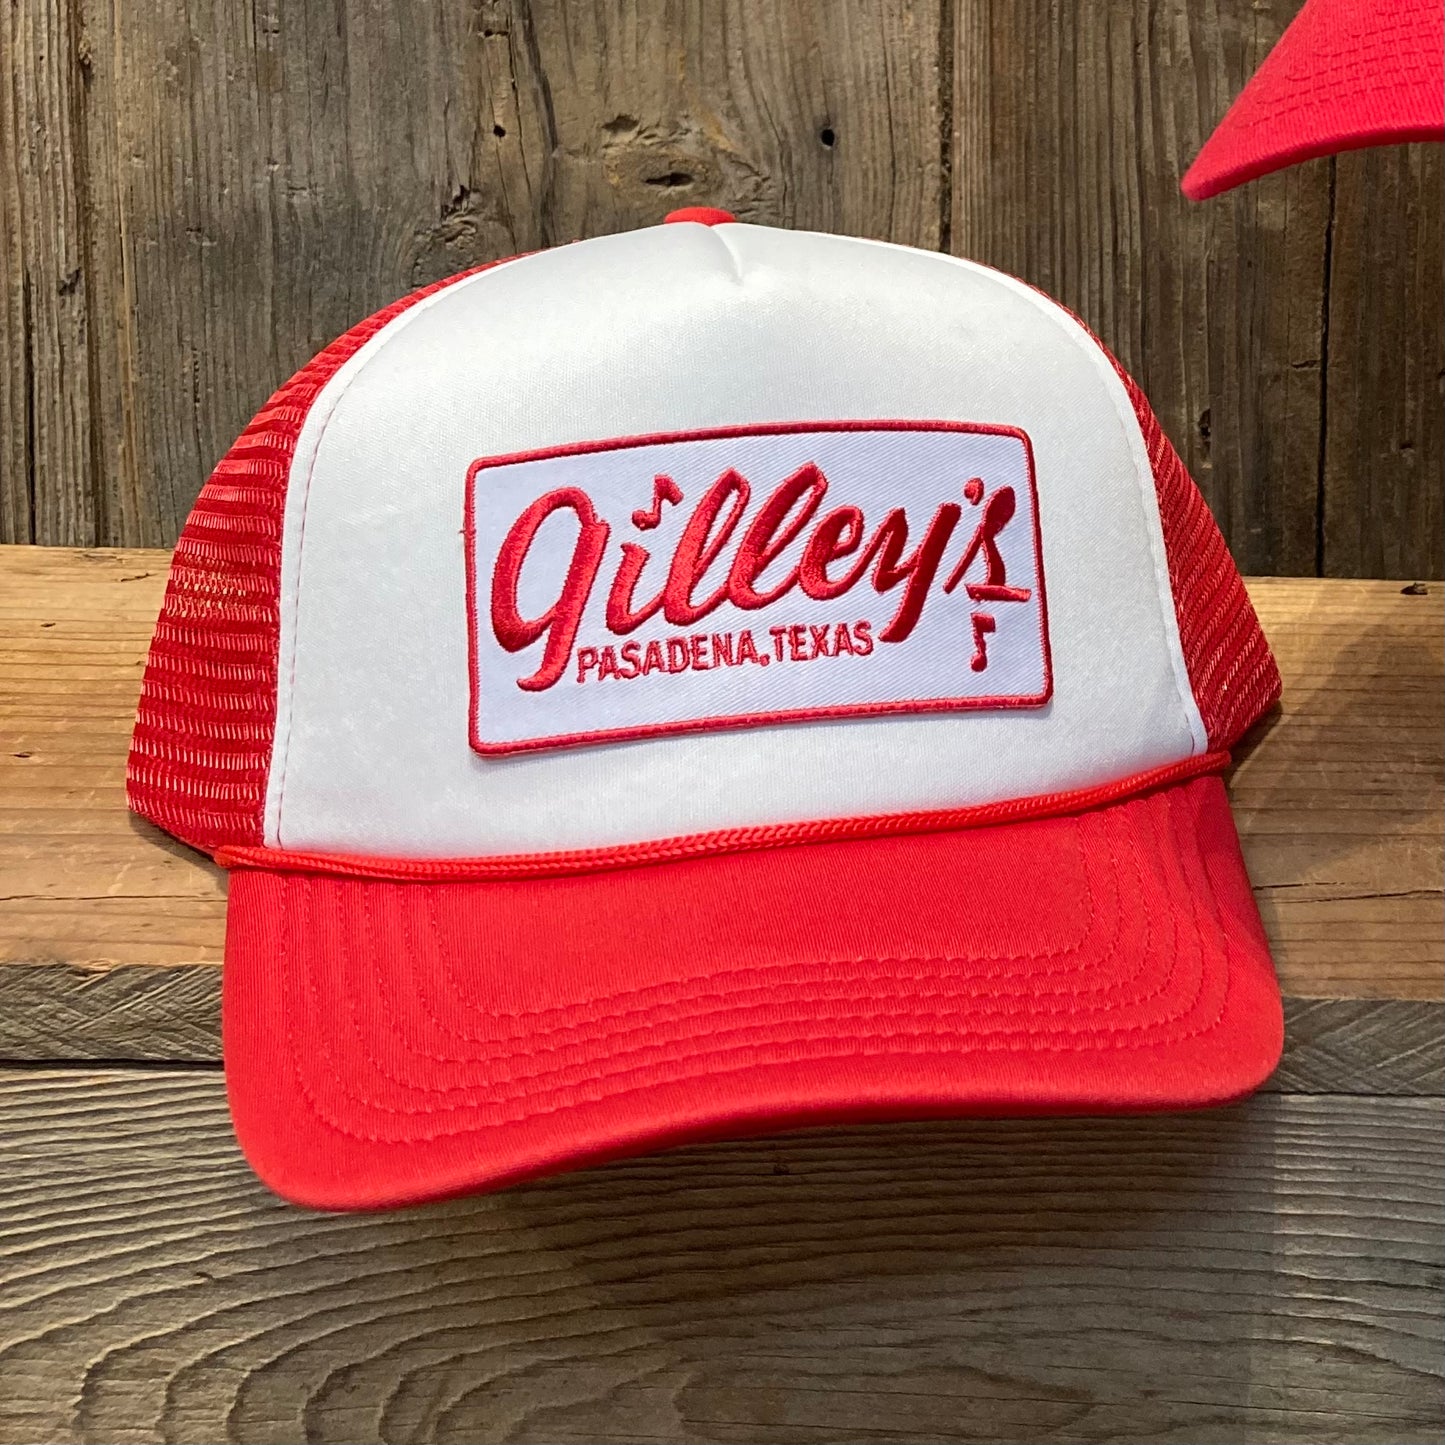 Gilley's Red Hats